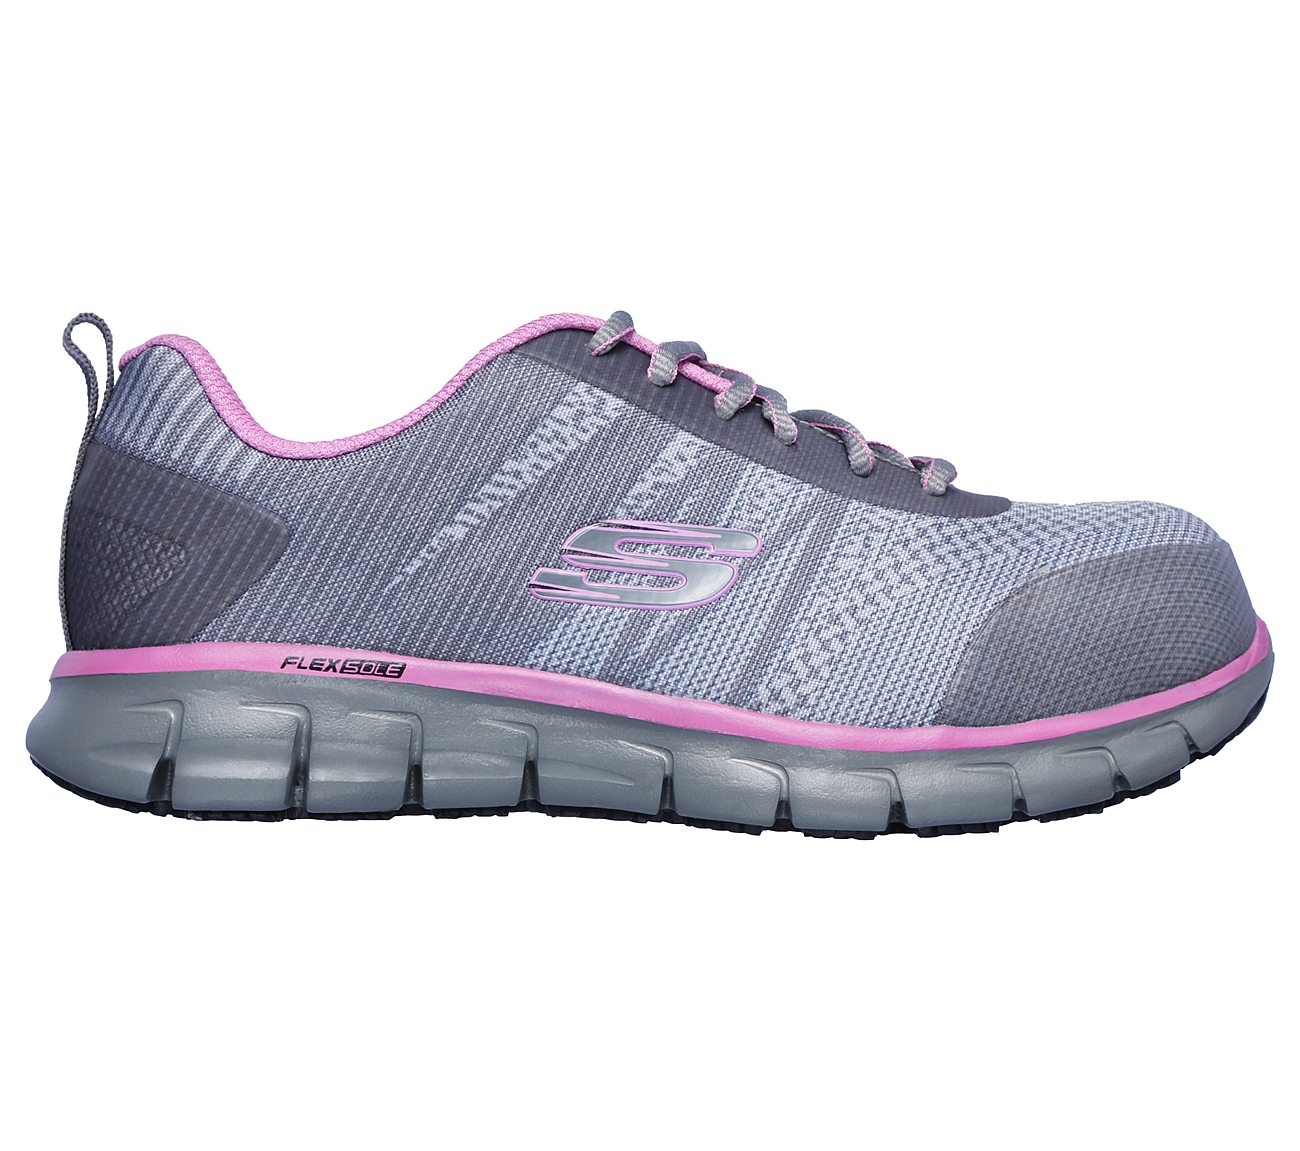 skechers sure track work shoes